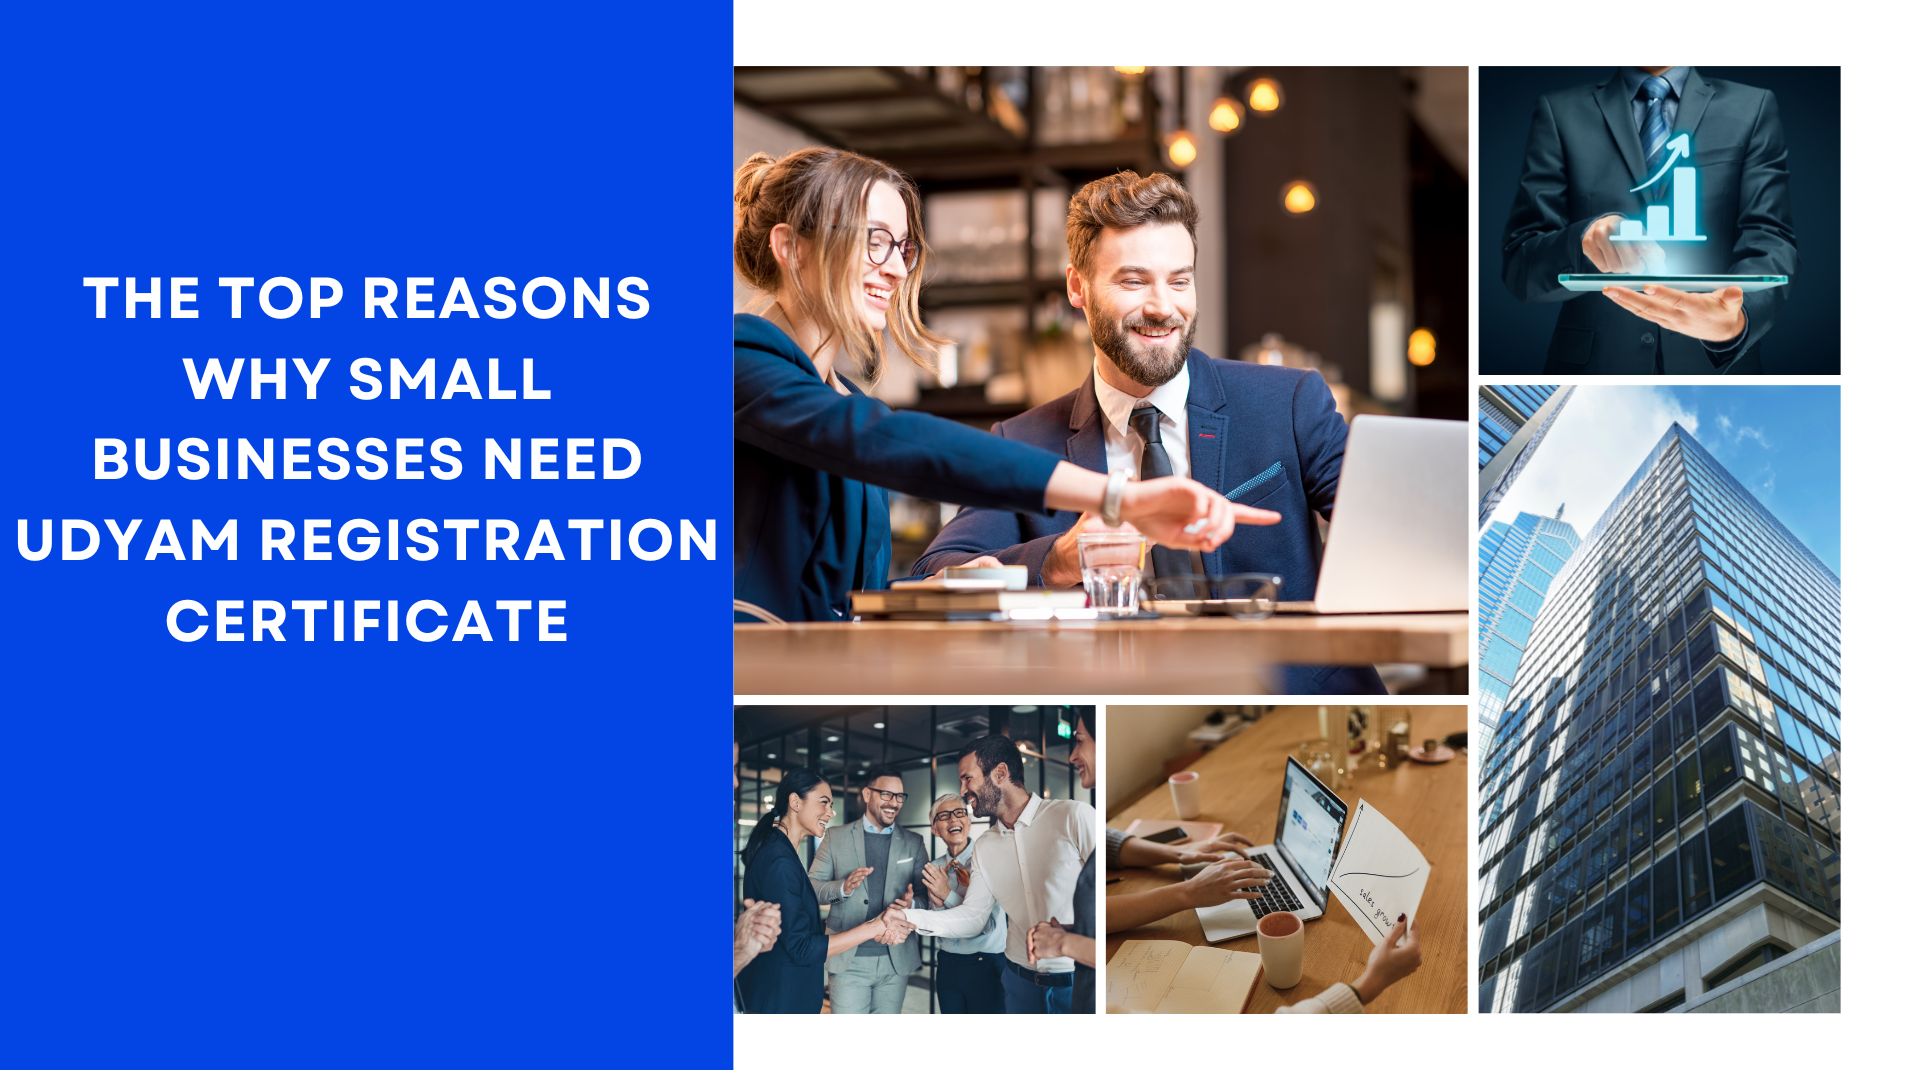 The Top Reasons Why Small Businesses Need Udyam Registration Certificate